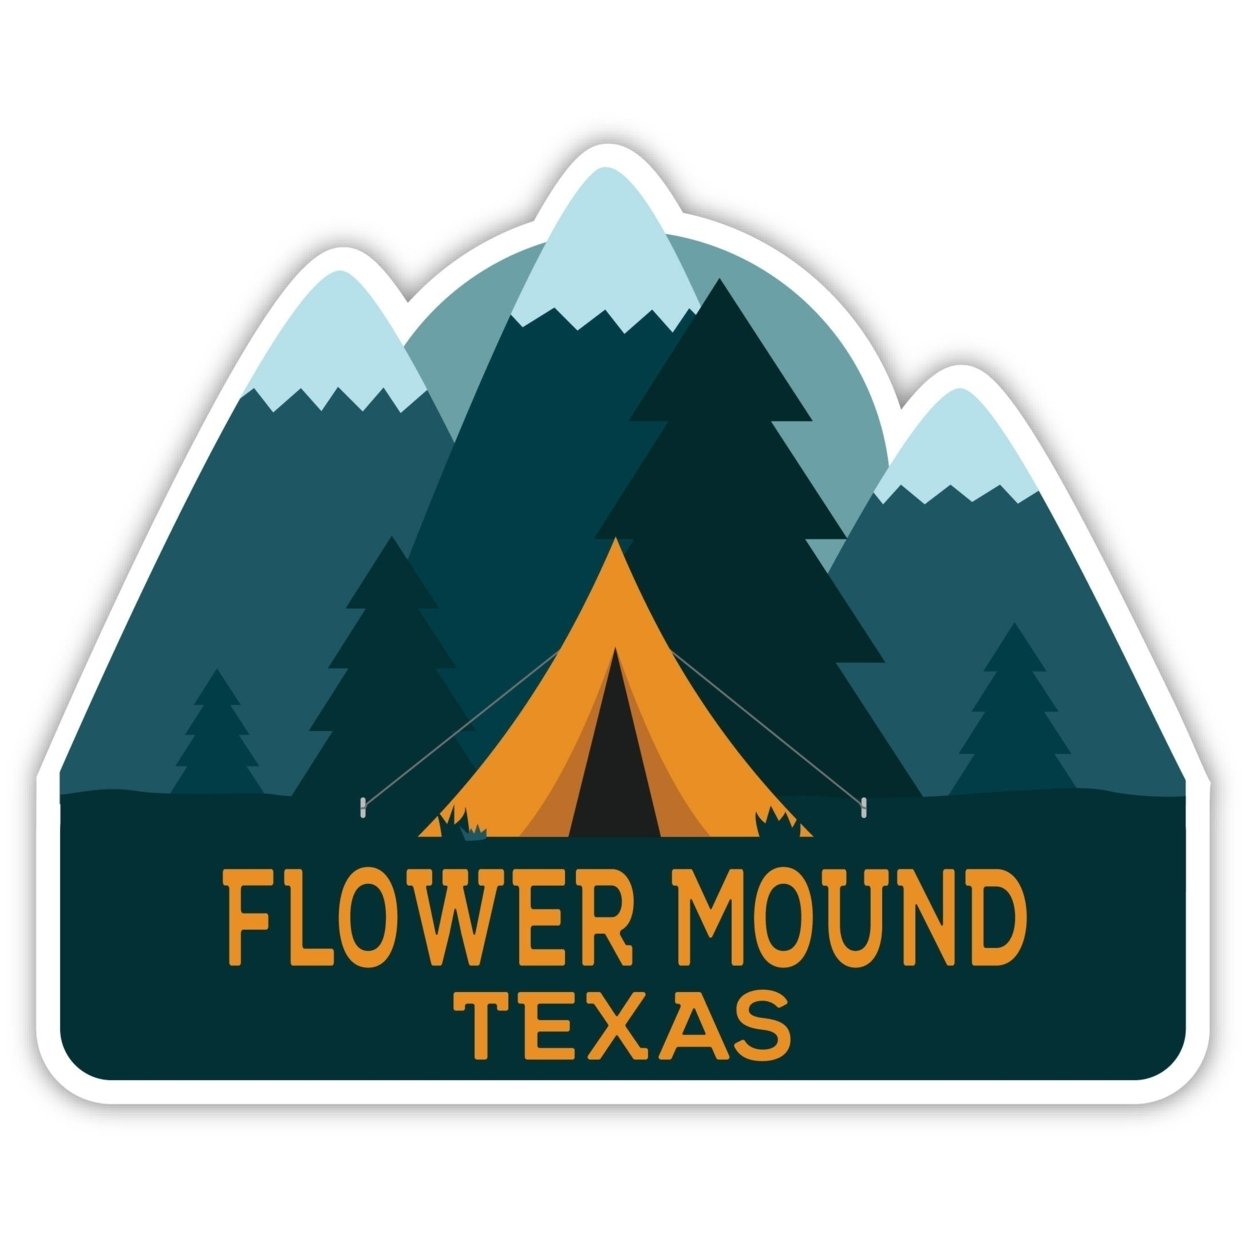 Flower Mound Texas Souvenir Decorative Stickers (Choose Theme And Size) - 4-Pack, 6-Inch, Tent